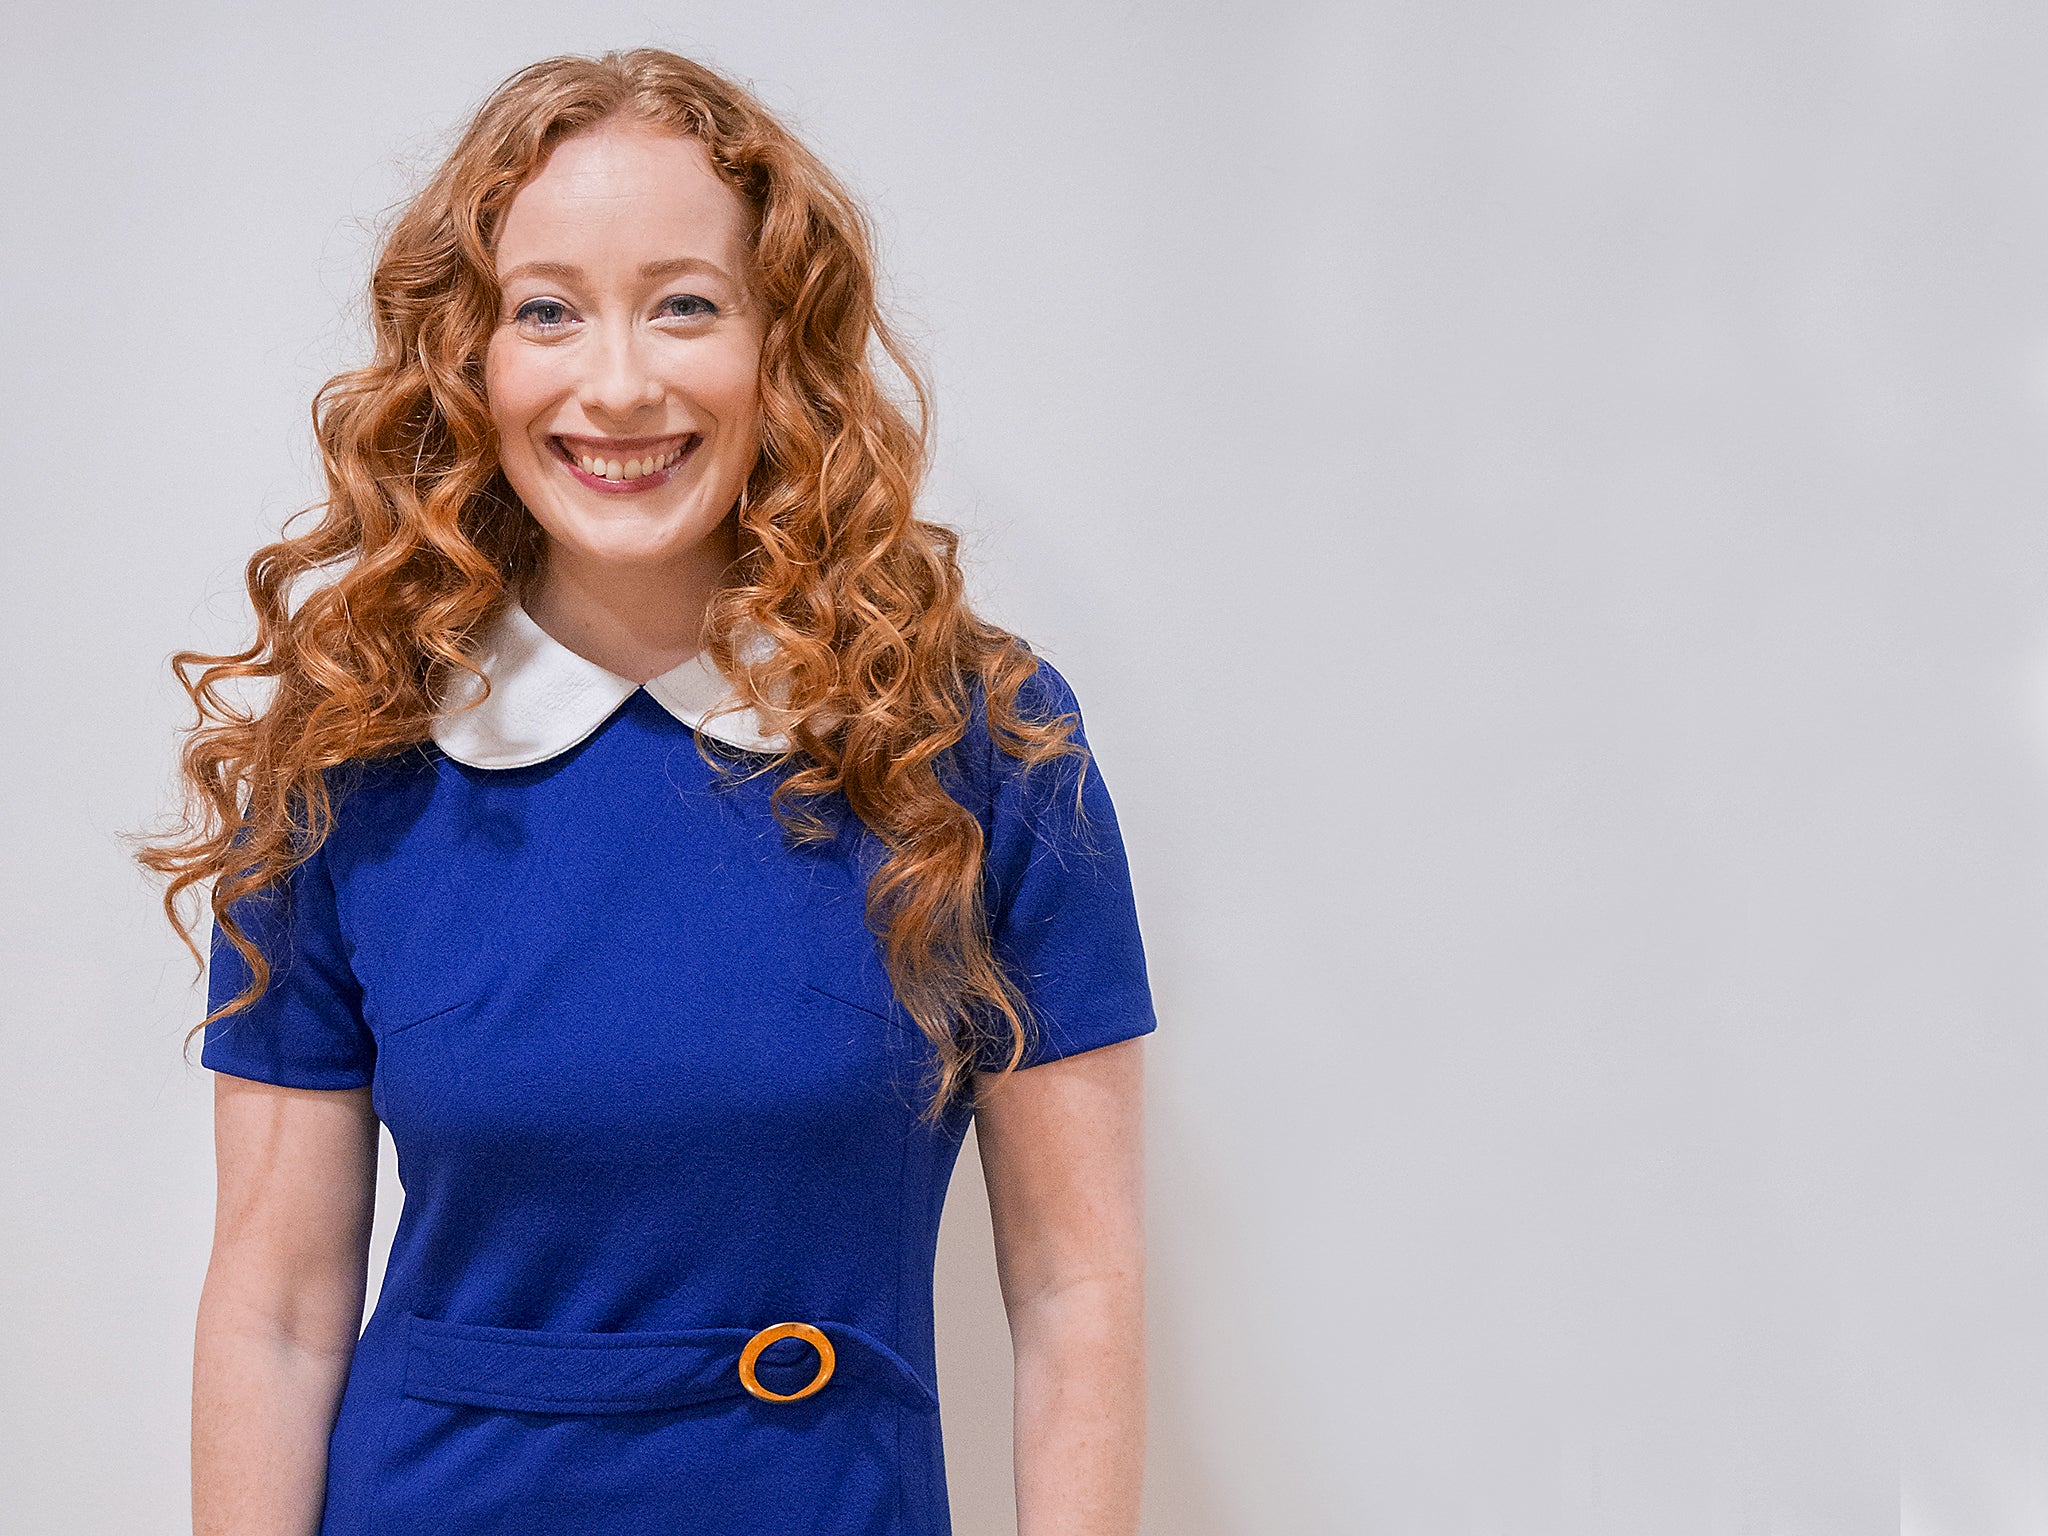 Victoria Yeates is performing in 'The Crucible' and in 'Call The Midwife' series six